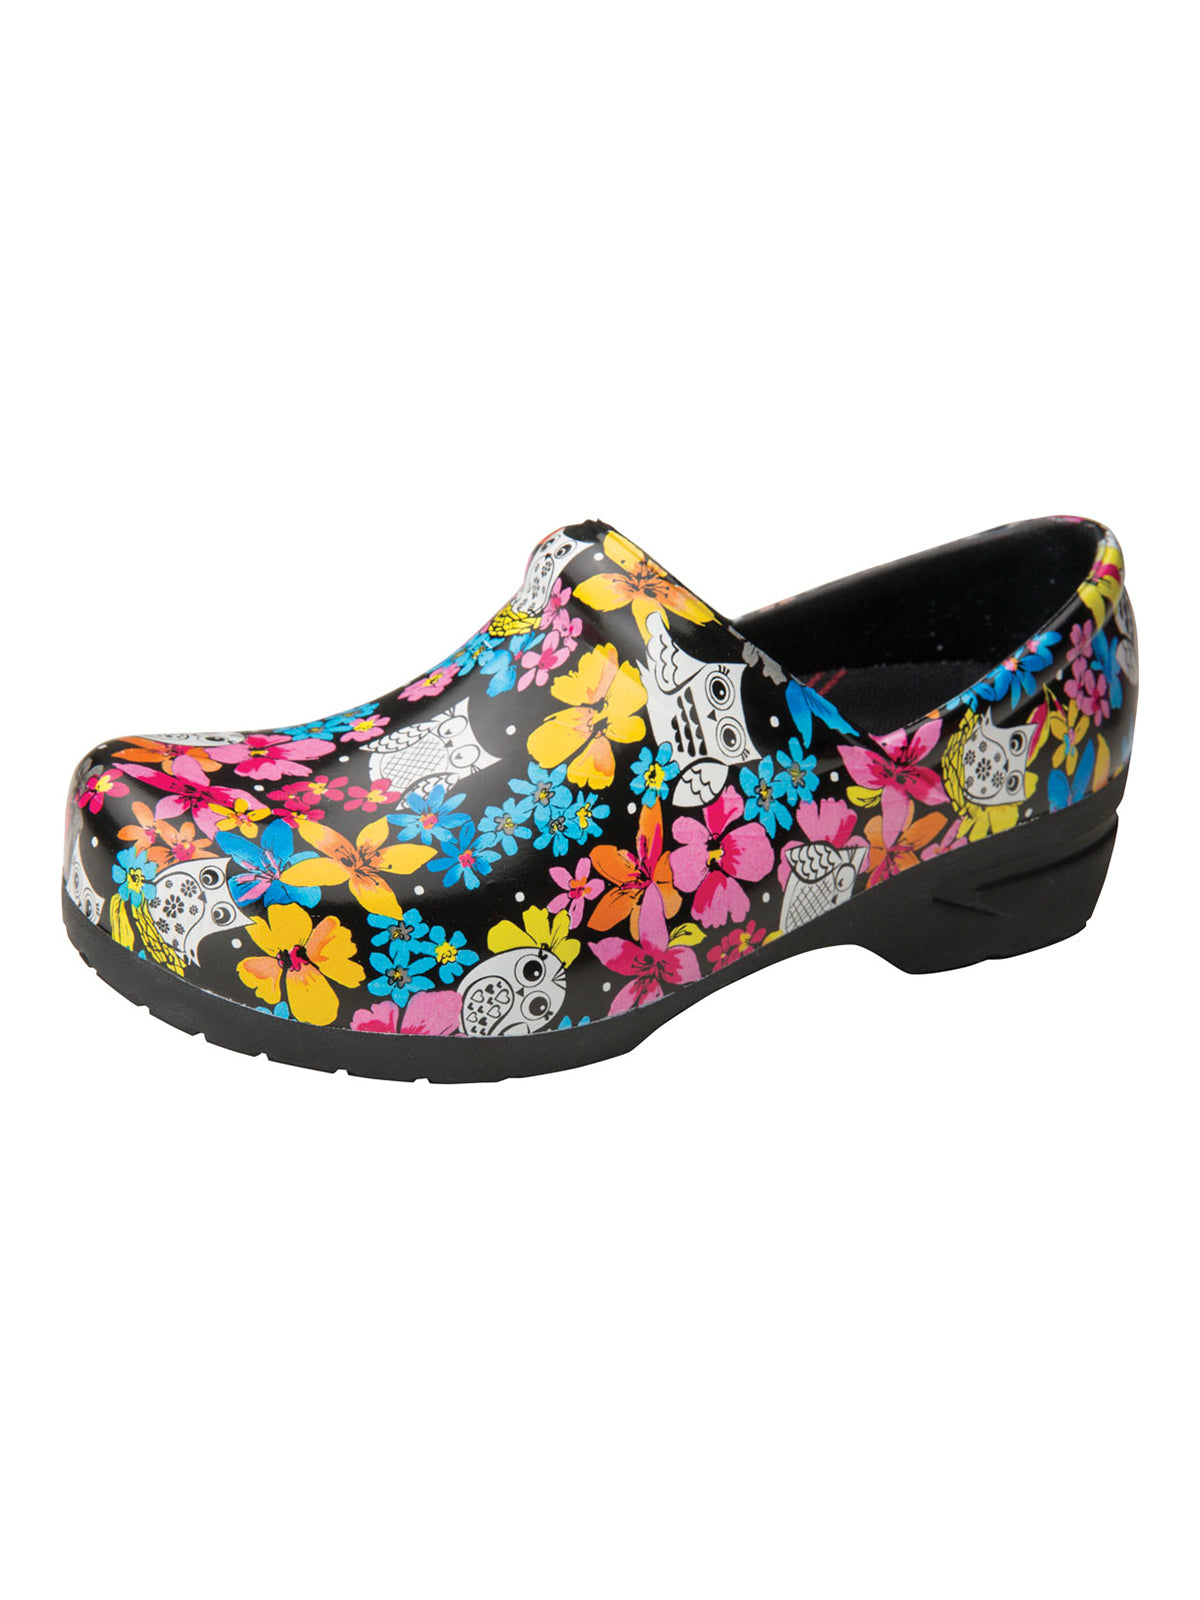 Women's Antimicrobial Insole Footwear